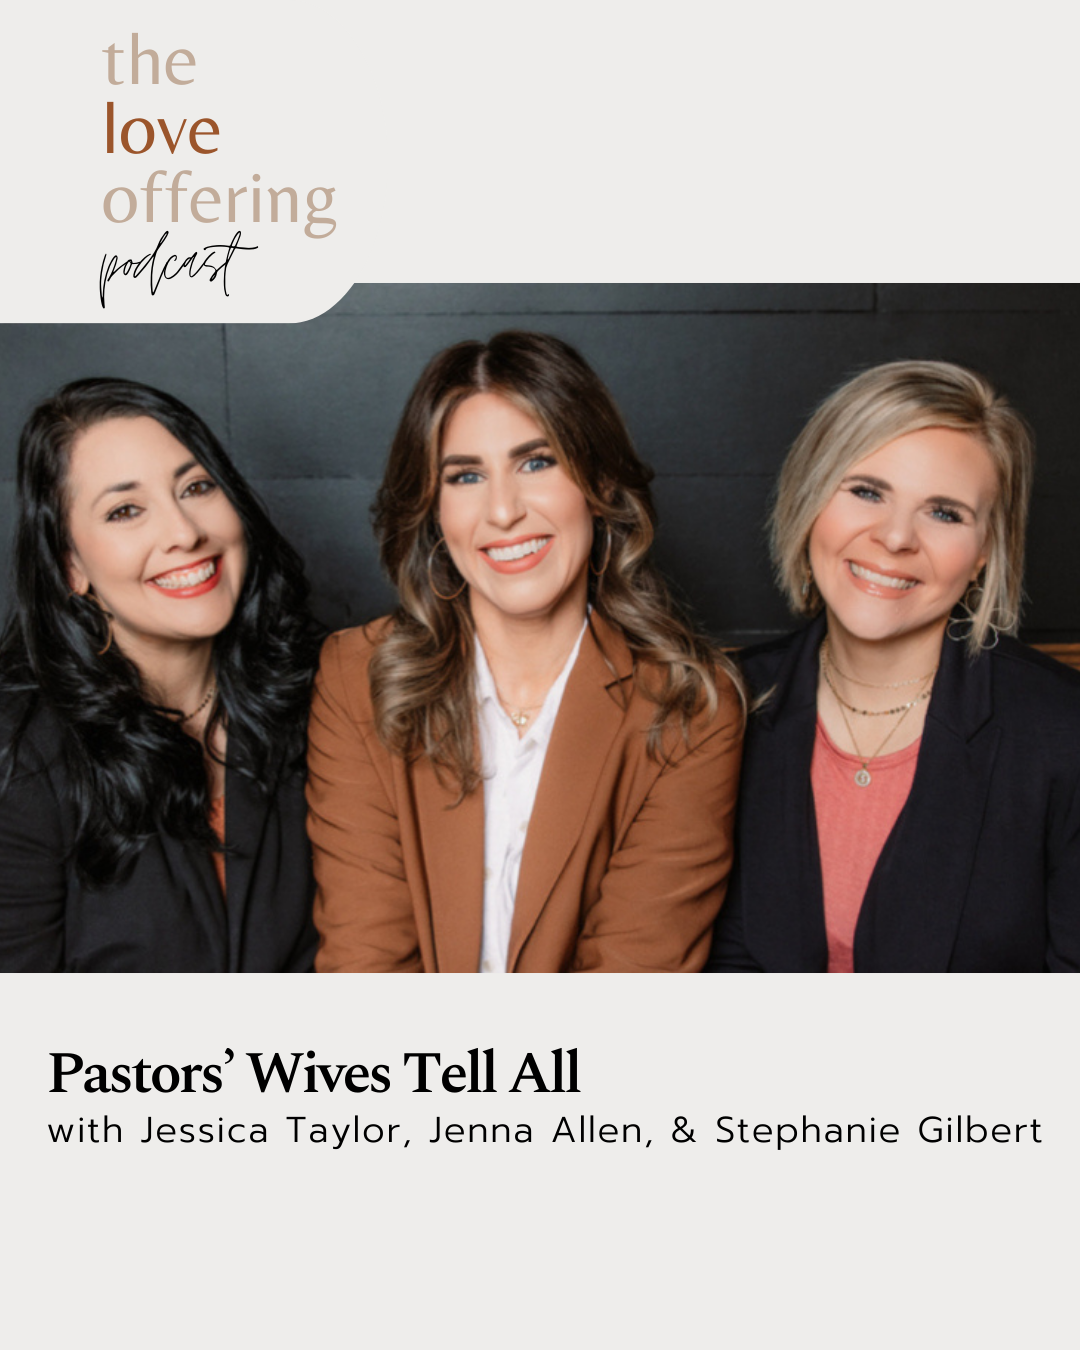 Pastors’ Wives Tell All with Jessica Taylor, Jenna Allen, & Stephanie Gilbert